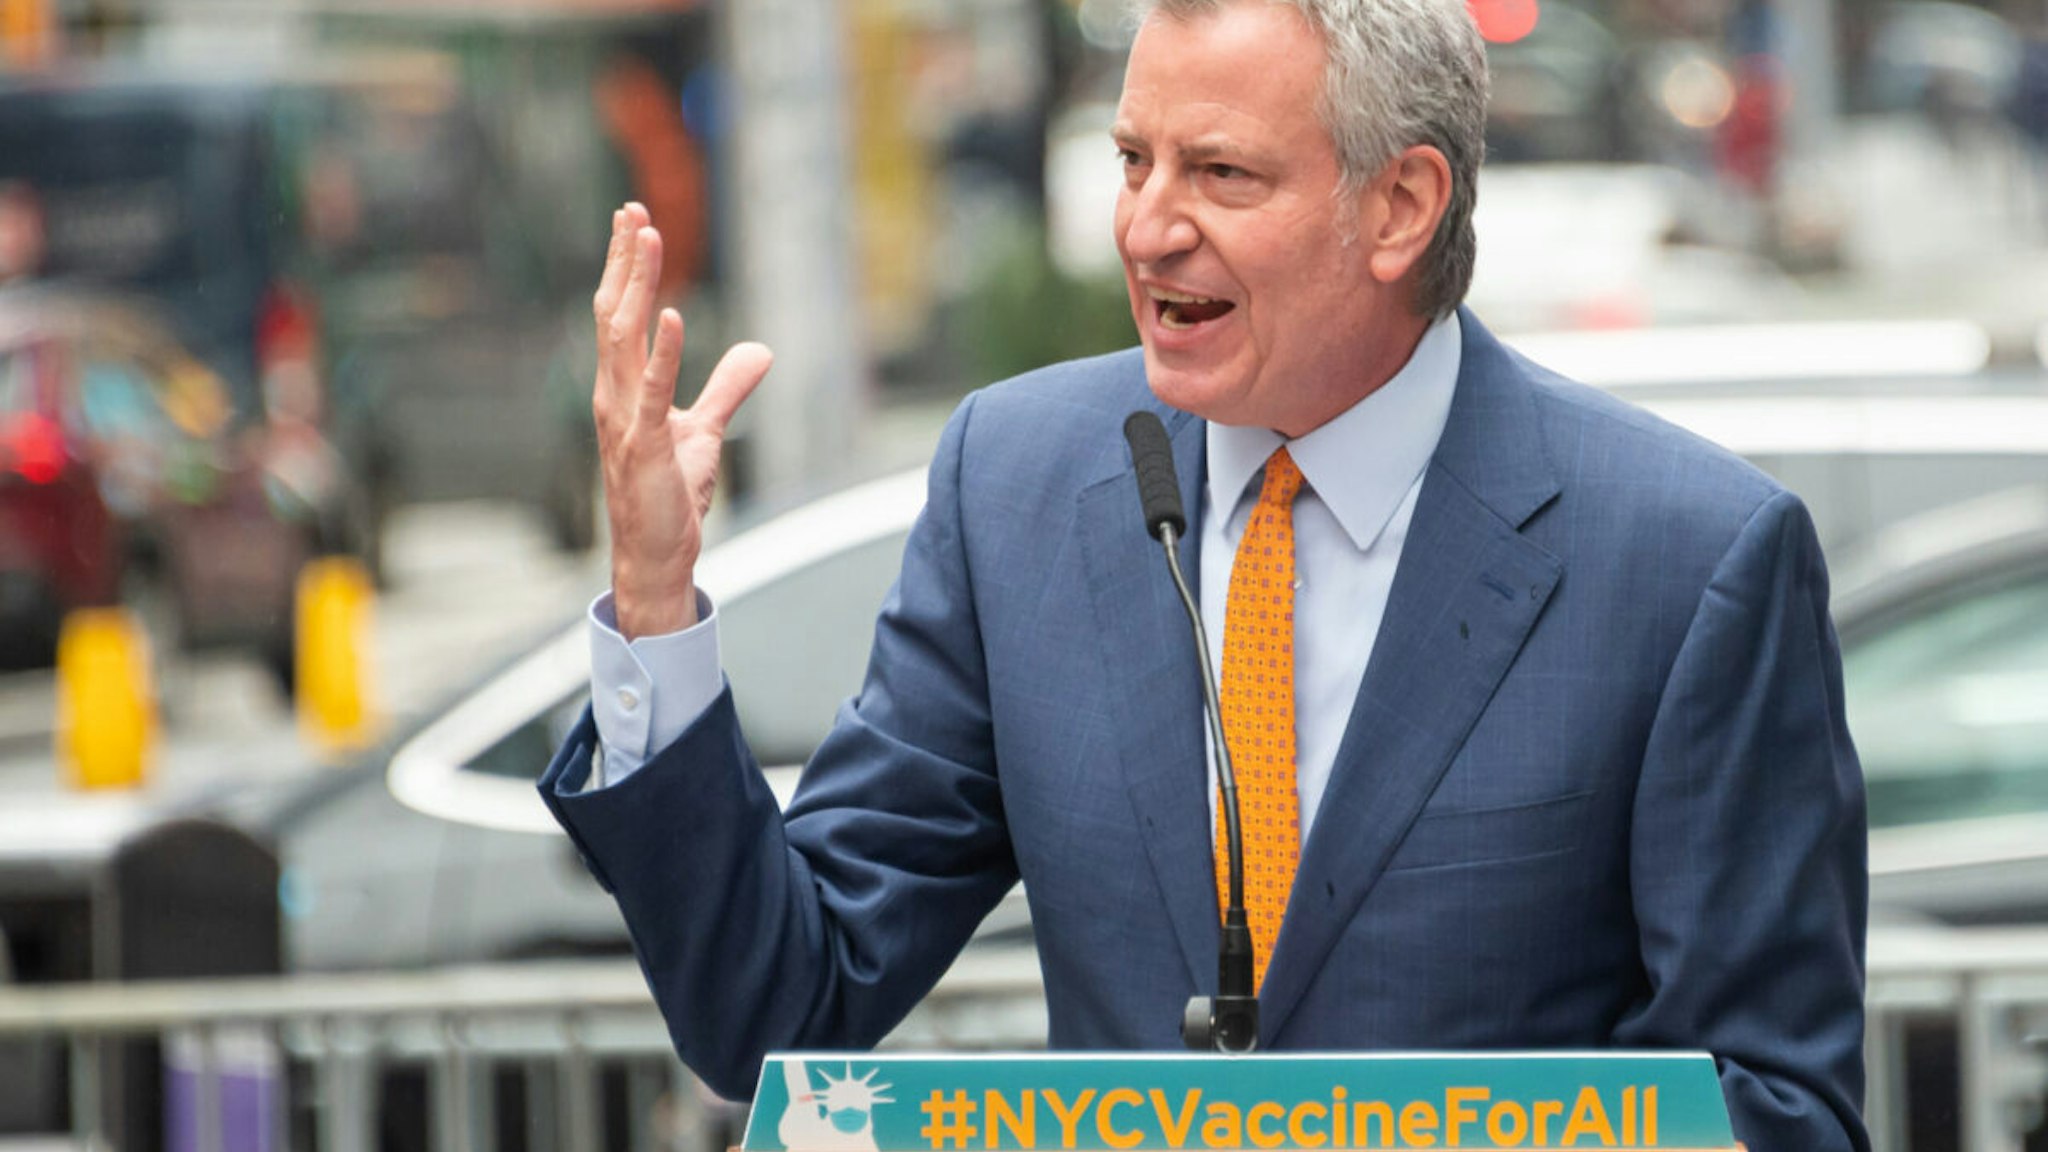 Mayor of New York City Bill de Blasio speaks during the opening of a vaccination center for Broadway workers in Times Square on April 12, 2021 in New York City